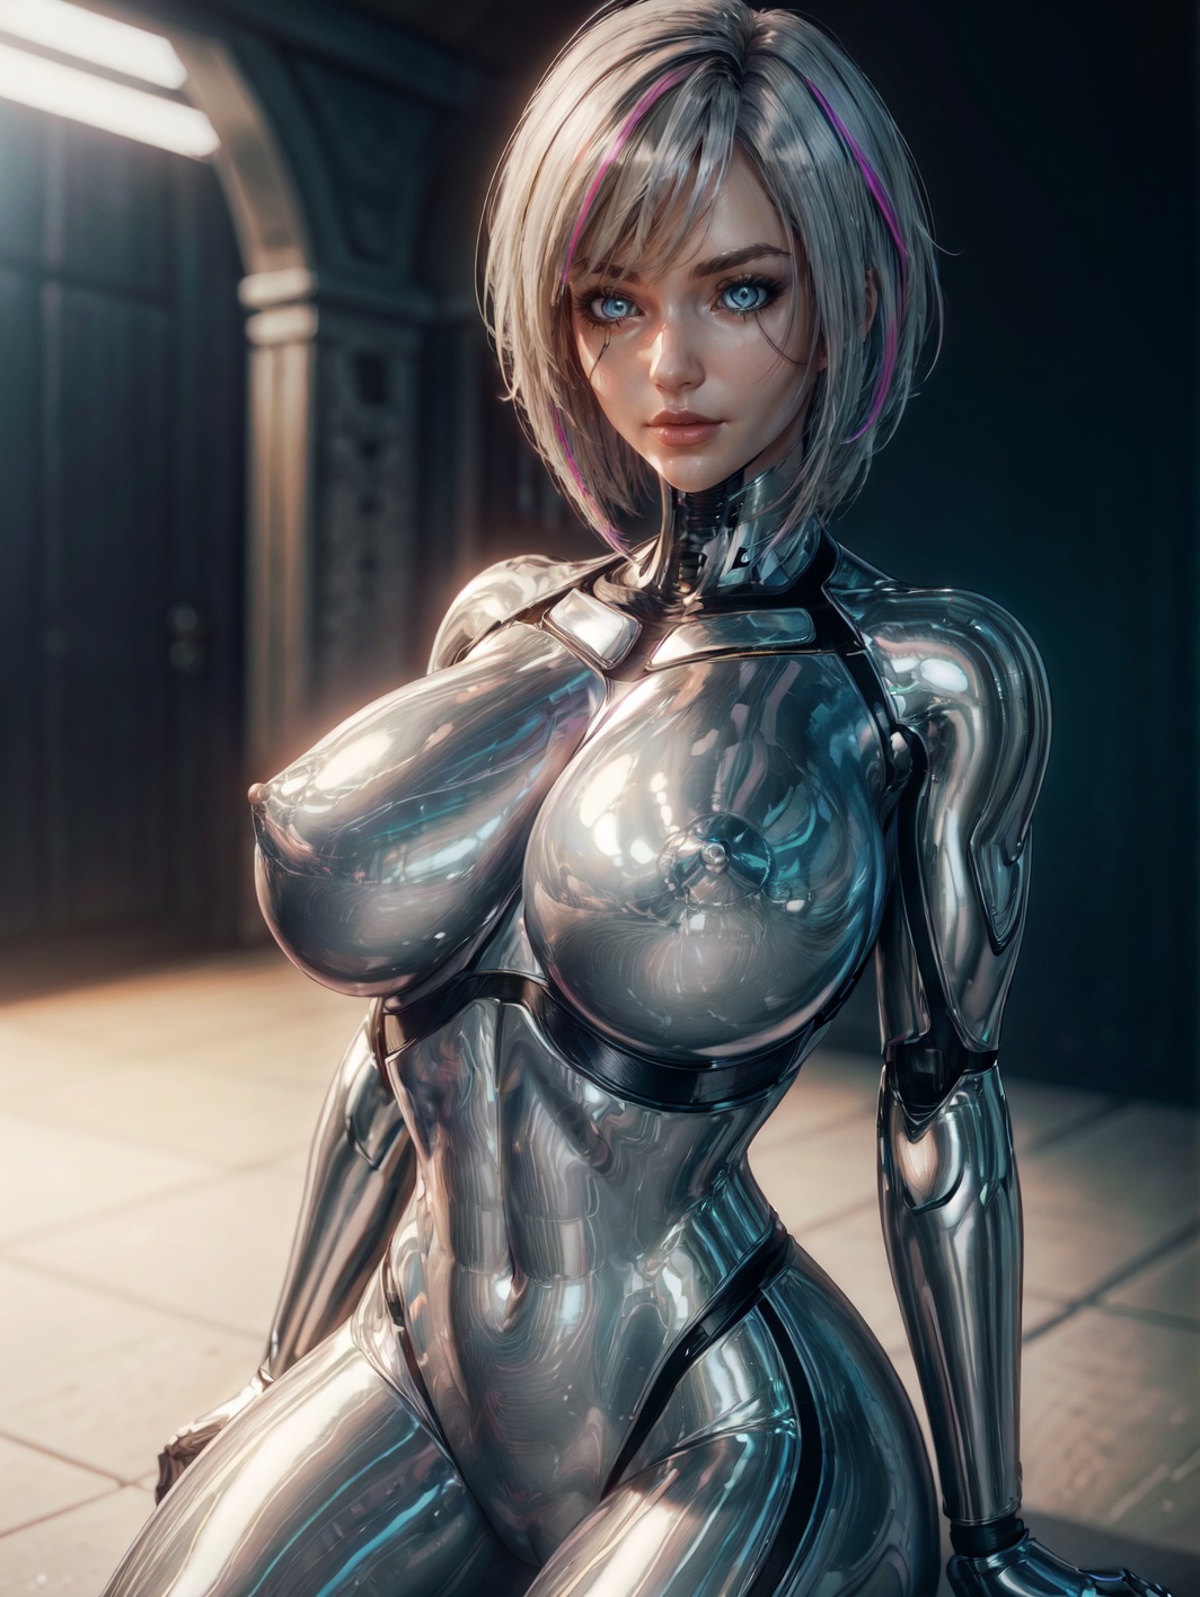 AI model image by Purfecter